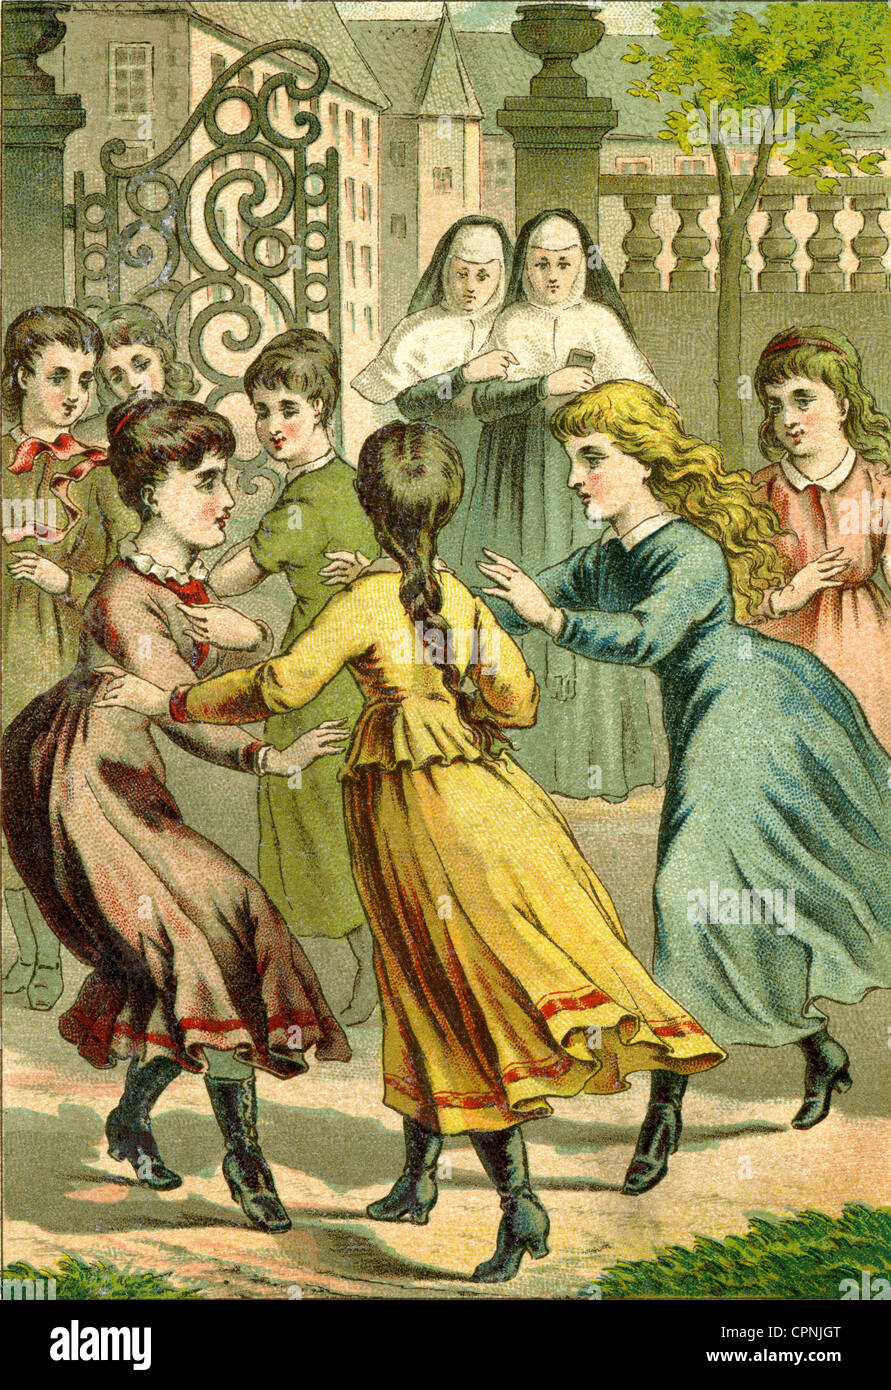 pedagogy, girls' boarding school, convent school, boarding school life, book illustration, Germany, 1886, Additional-Rights-Clearences-Not Available Stock Photo